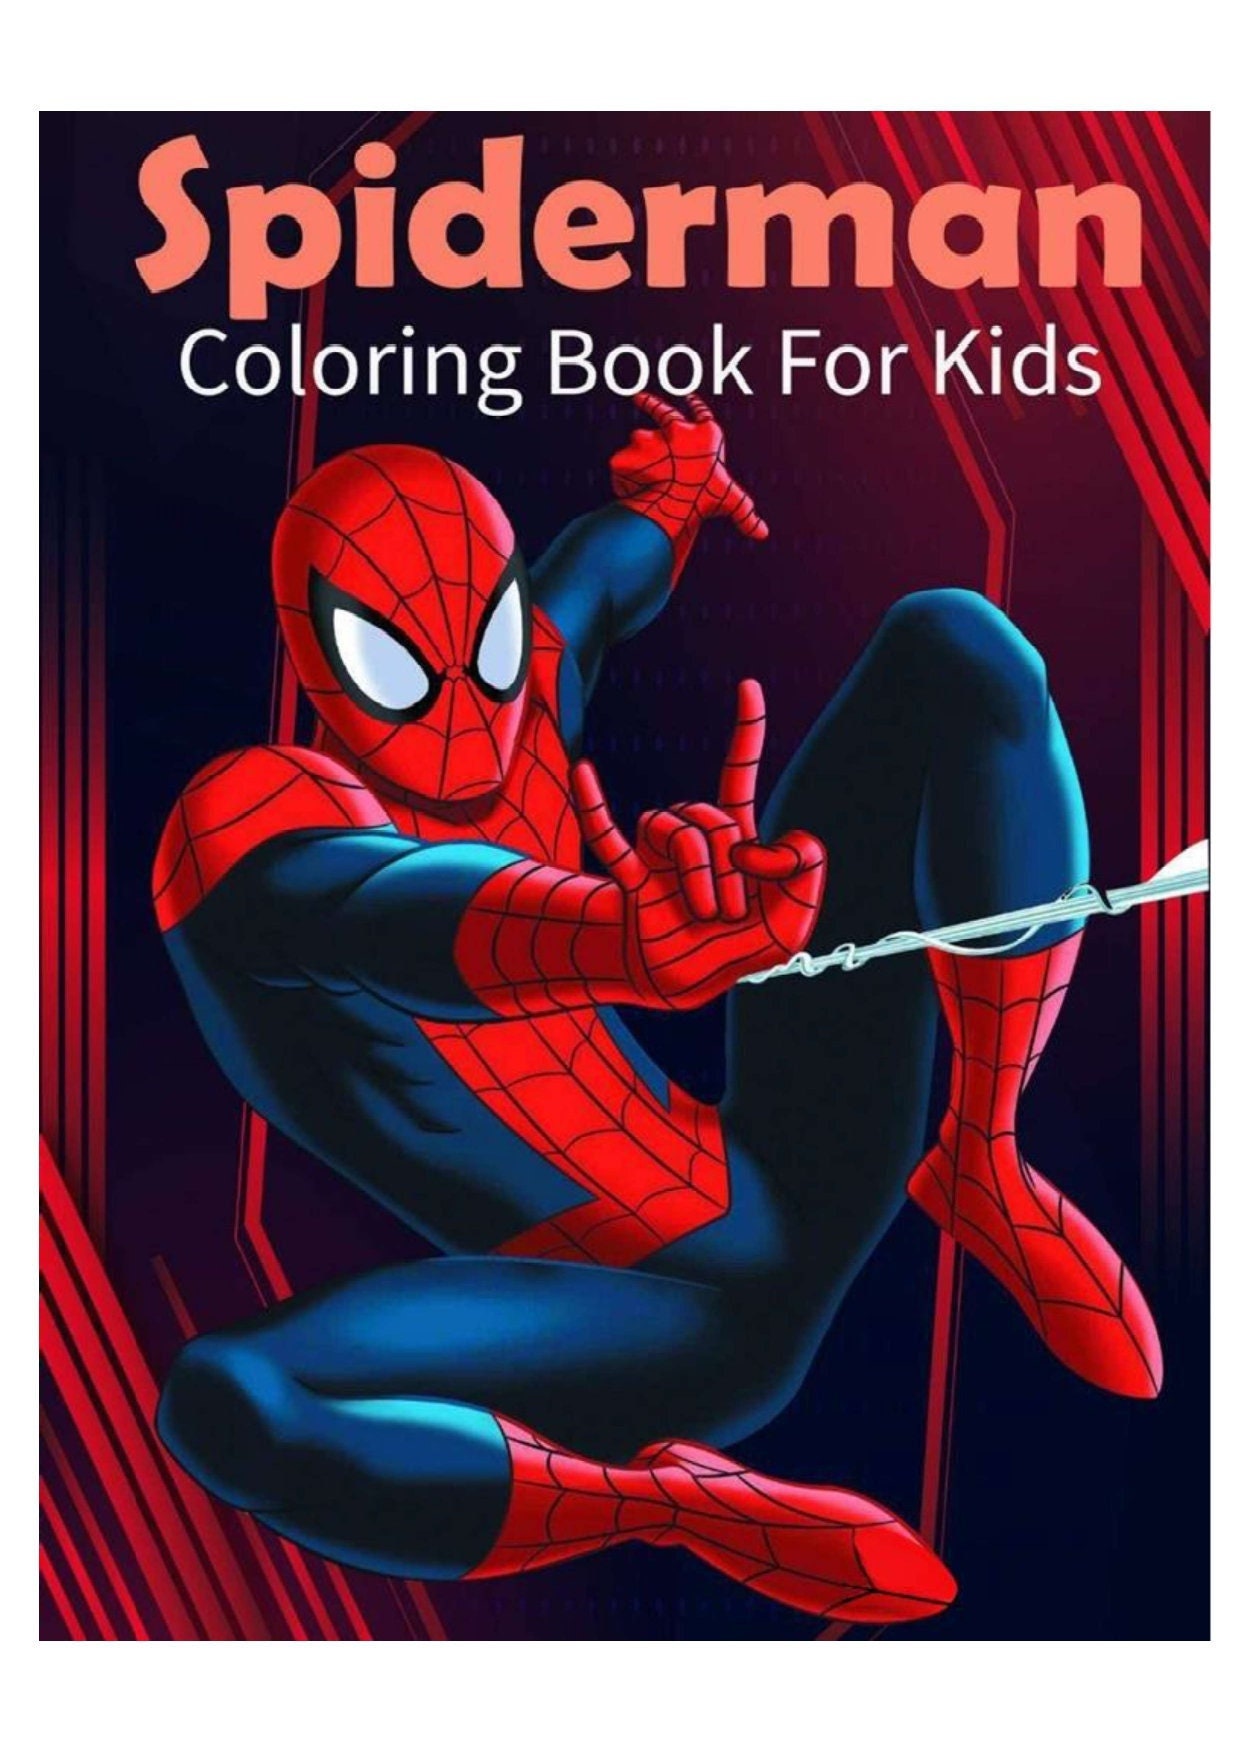 spiderman coloring book: +50 Amazing images to color For Fans Of